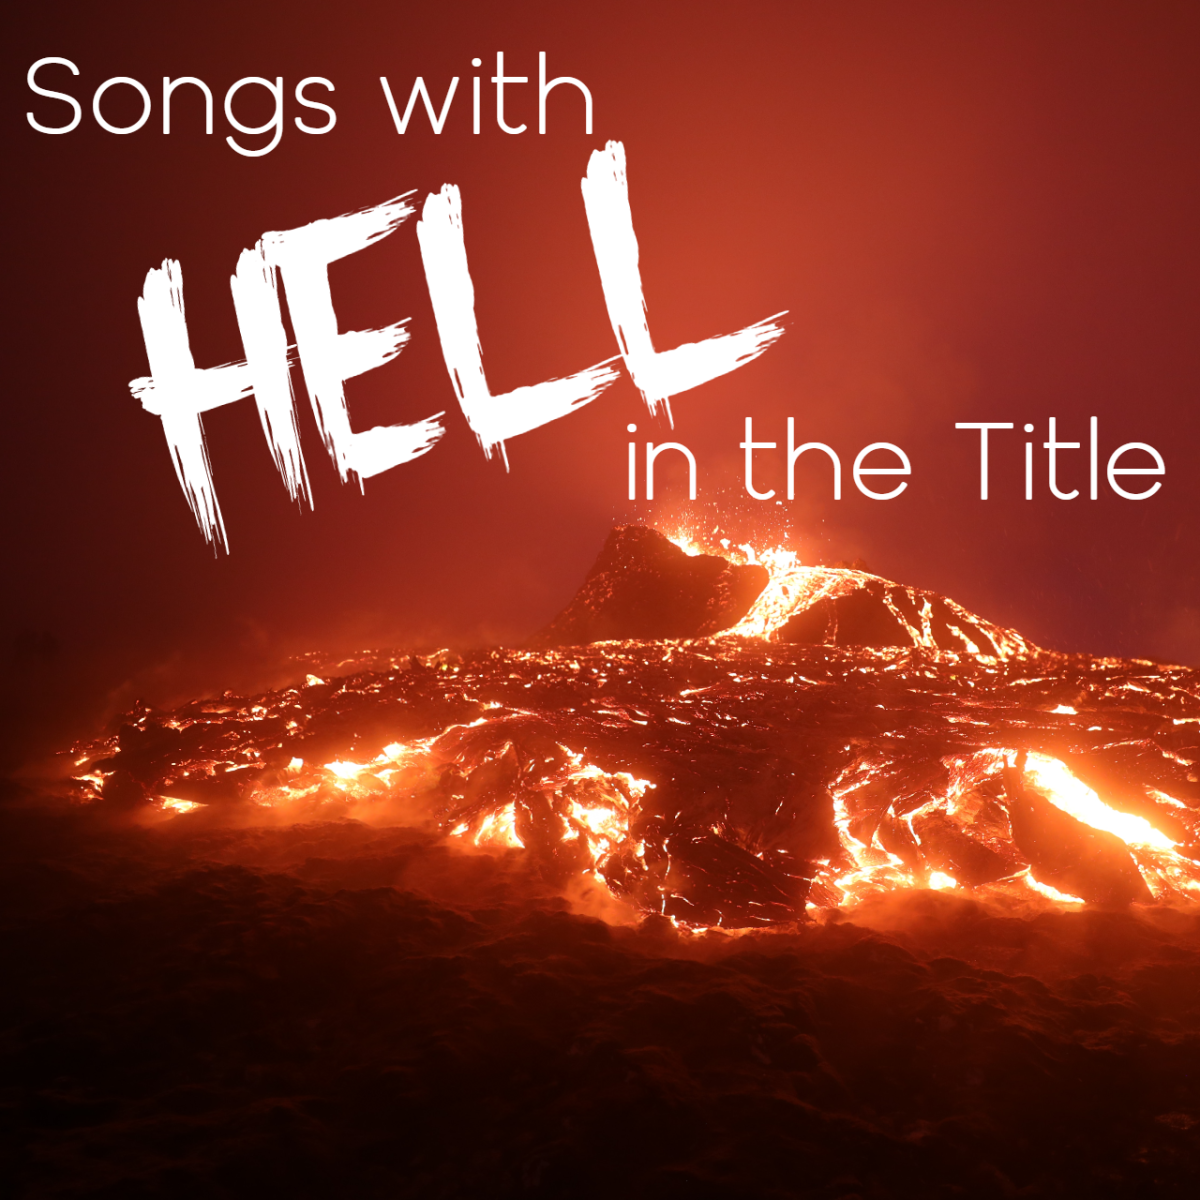 70 Songs With Hell in the Title